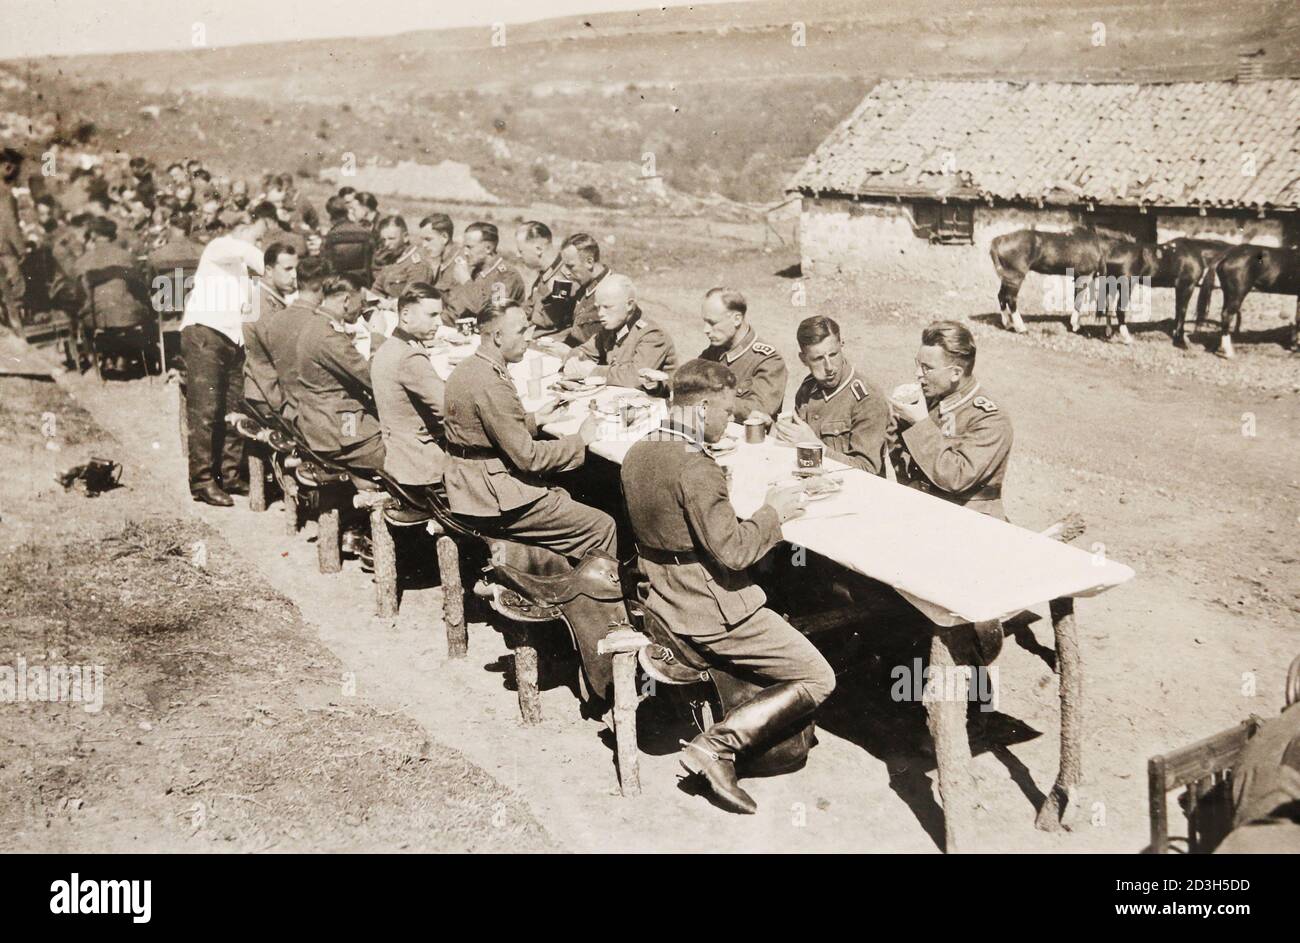 Lunch for German officers during the World War II. Stock Photo